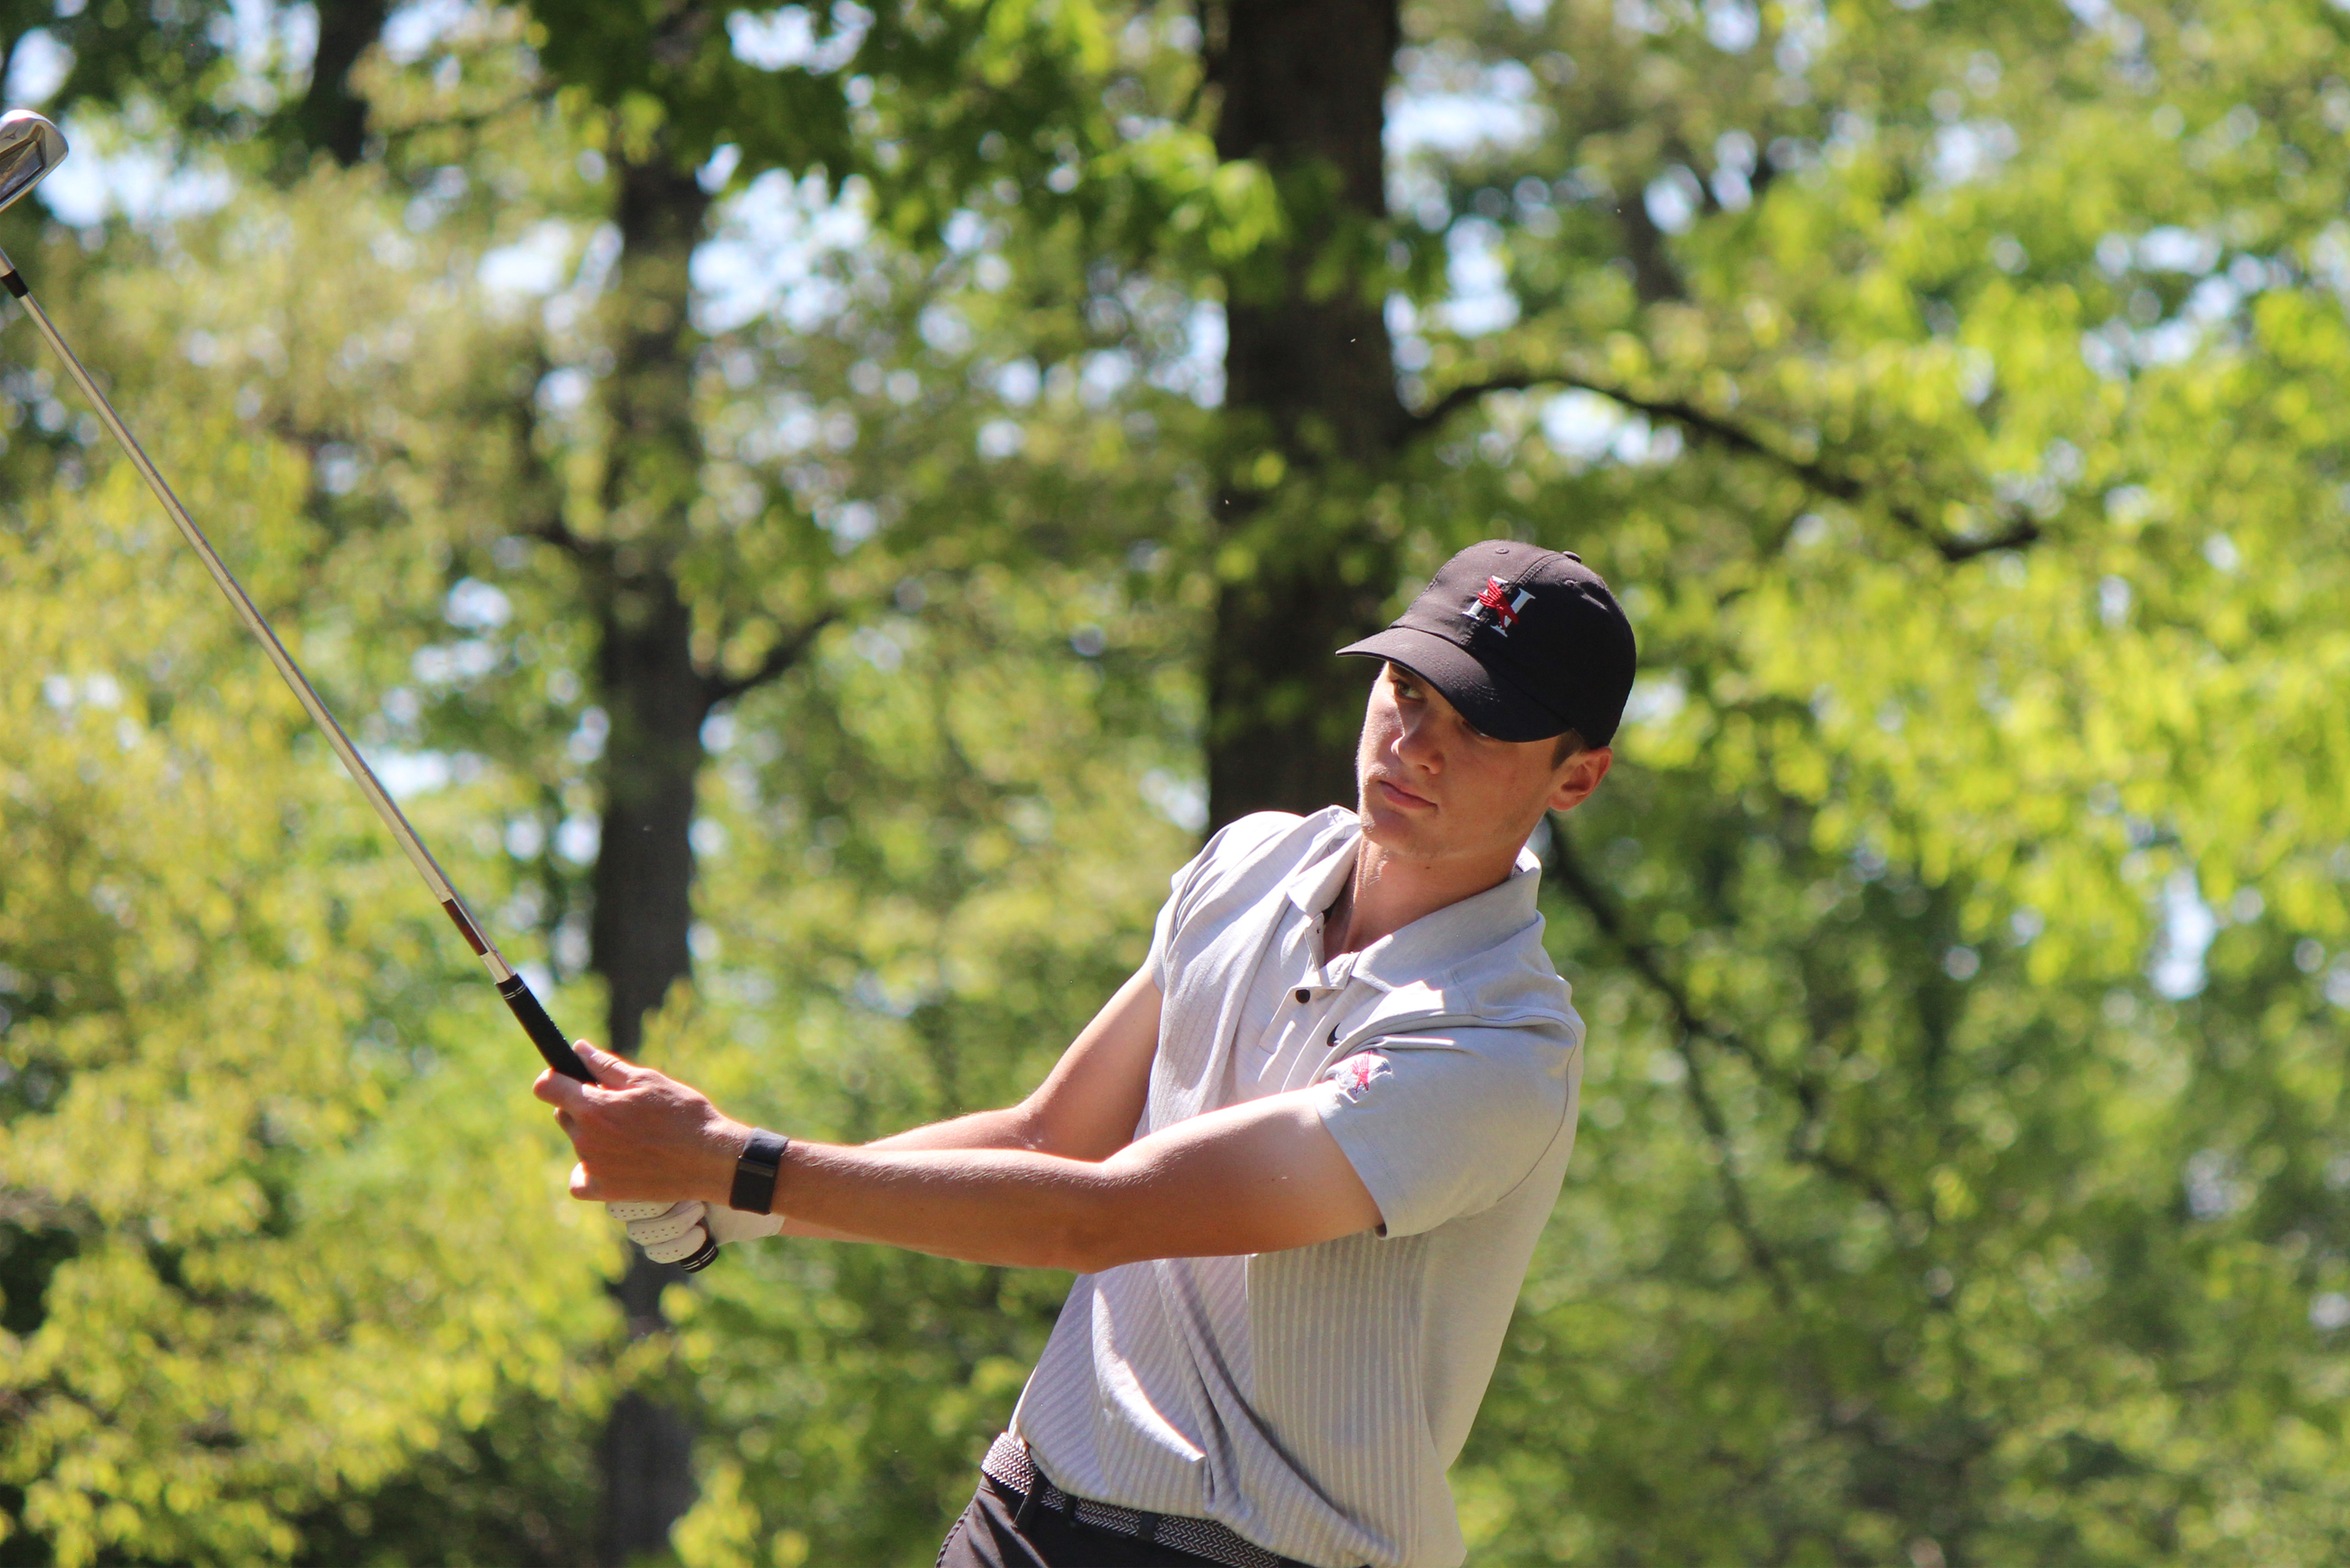 Jack Burr Named to NCAA Division III PING All-Region Team